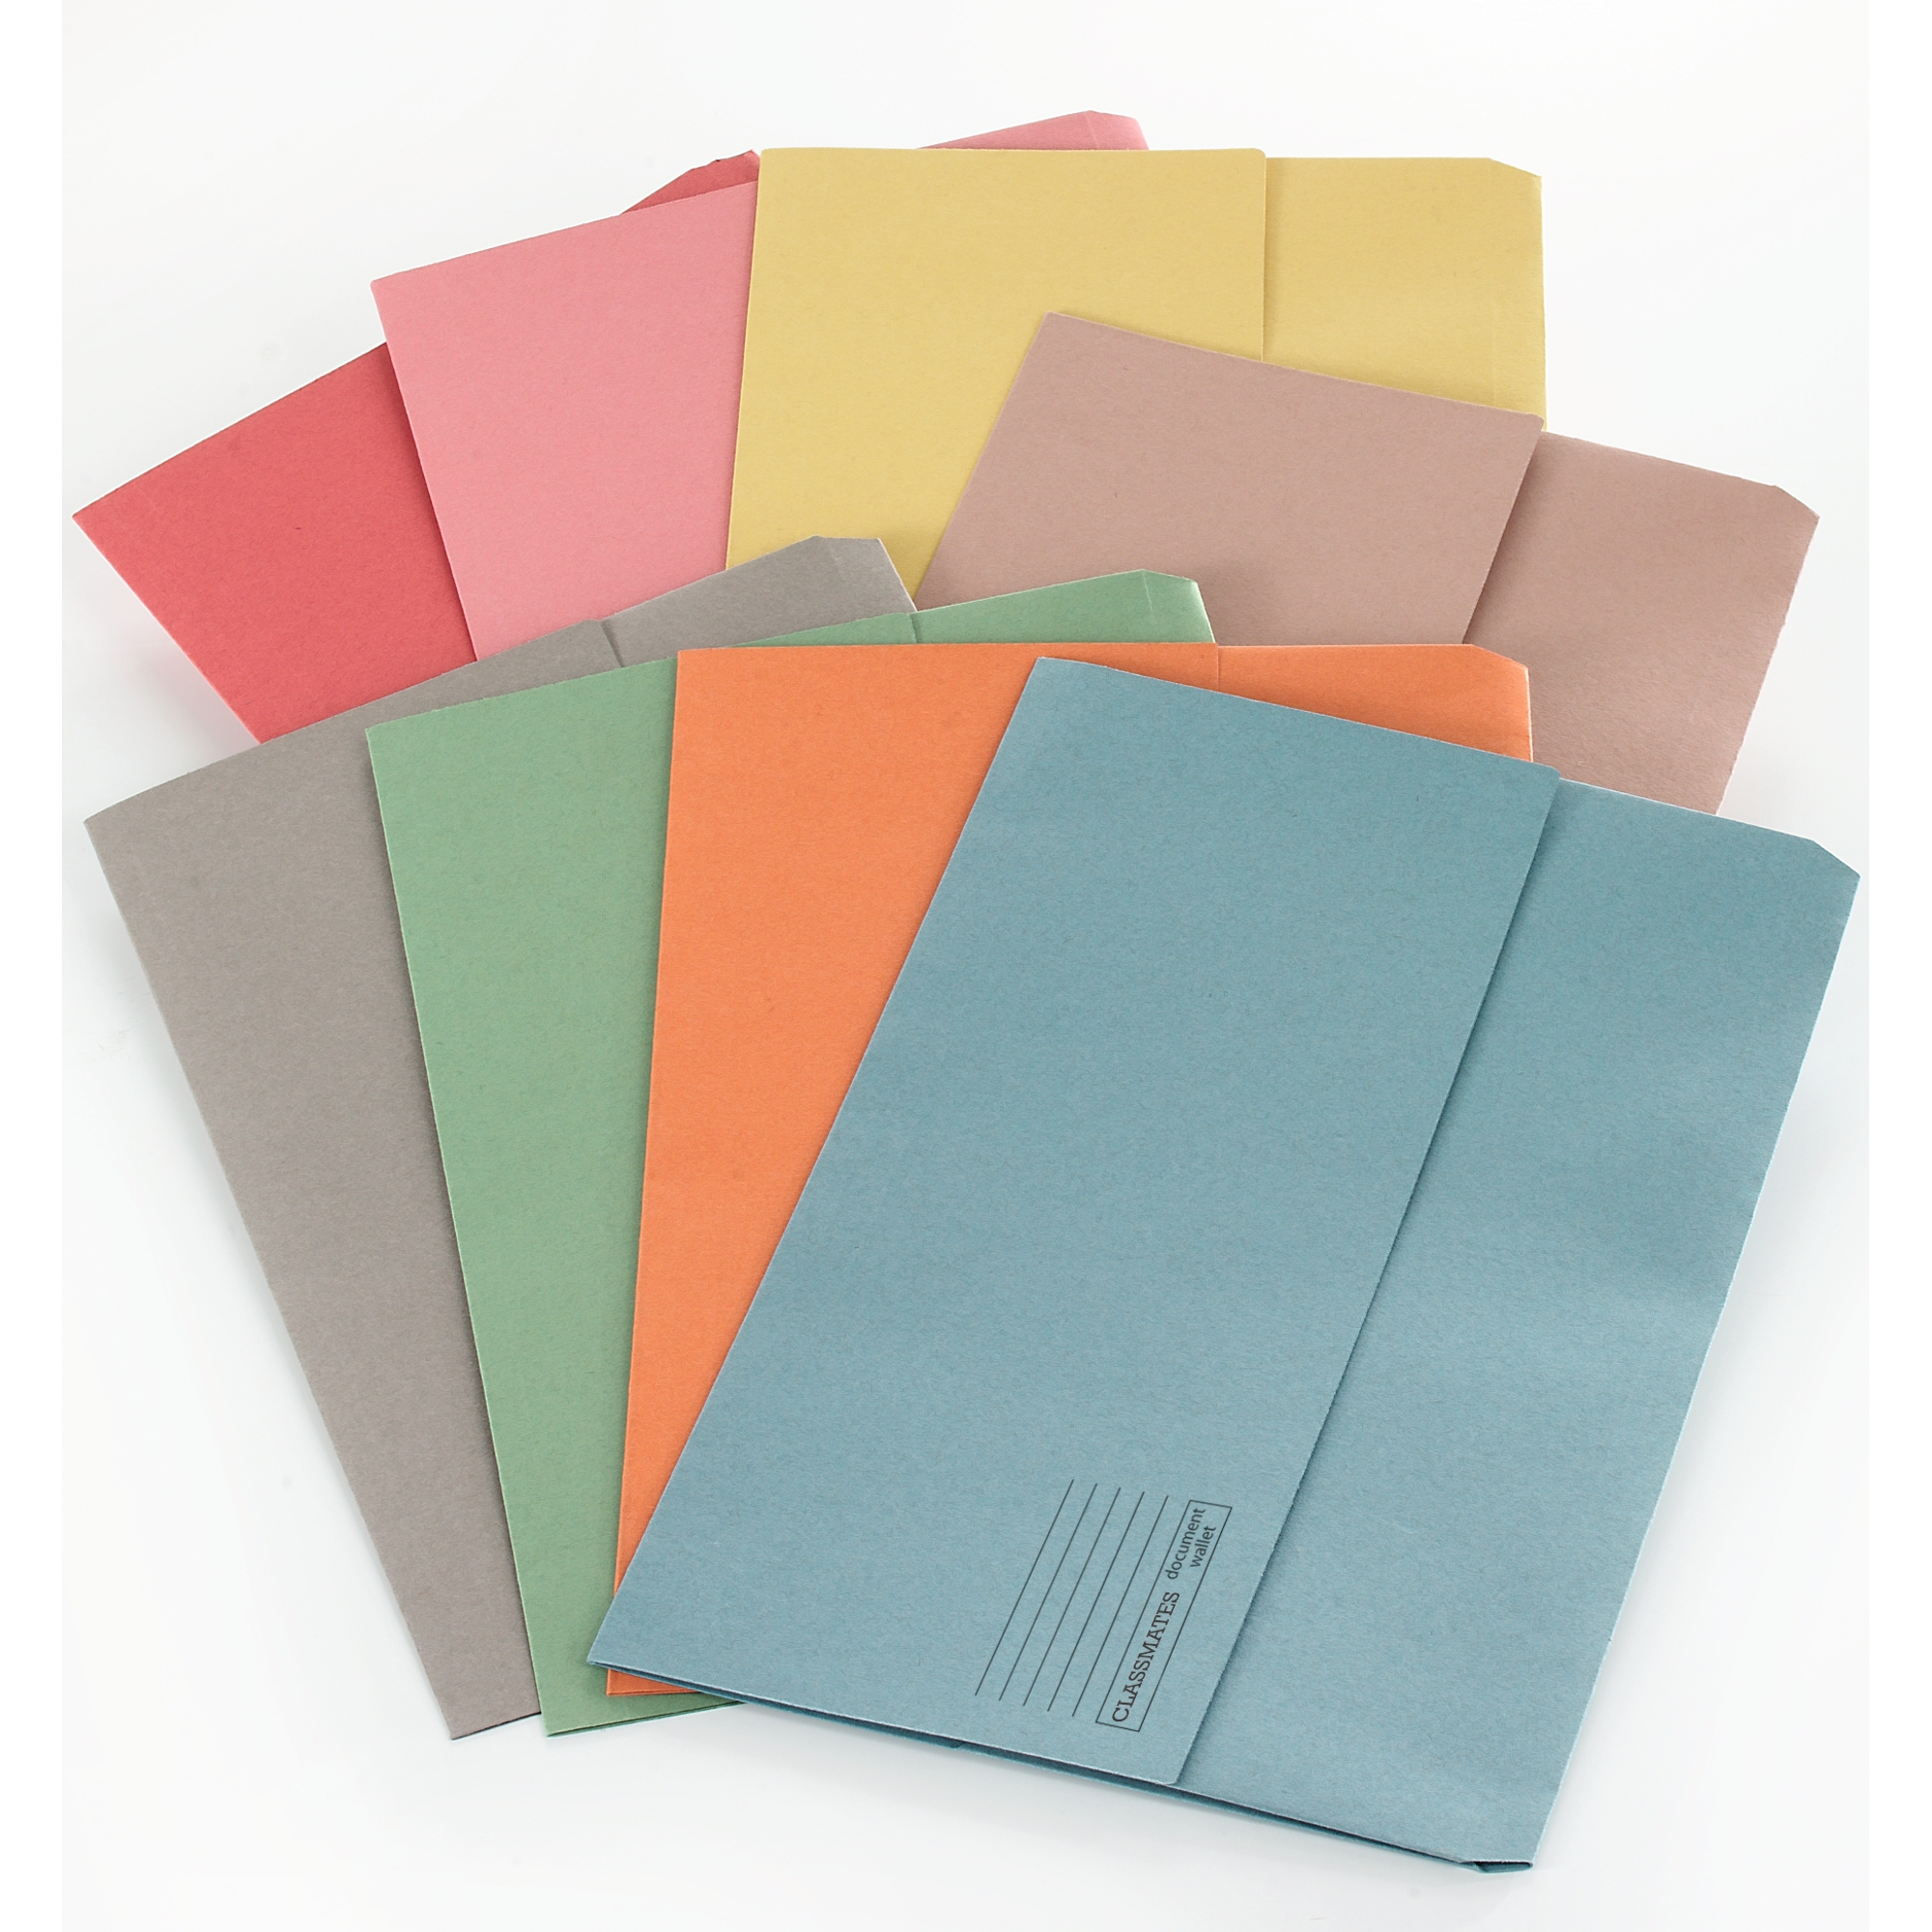 Classmates Document Wallet Foolscap - Assorted - Pack of 50